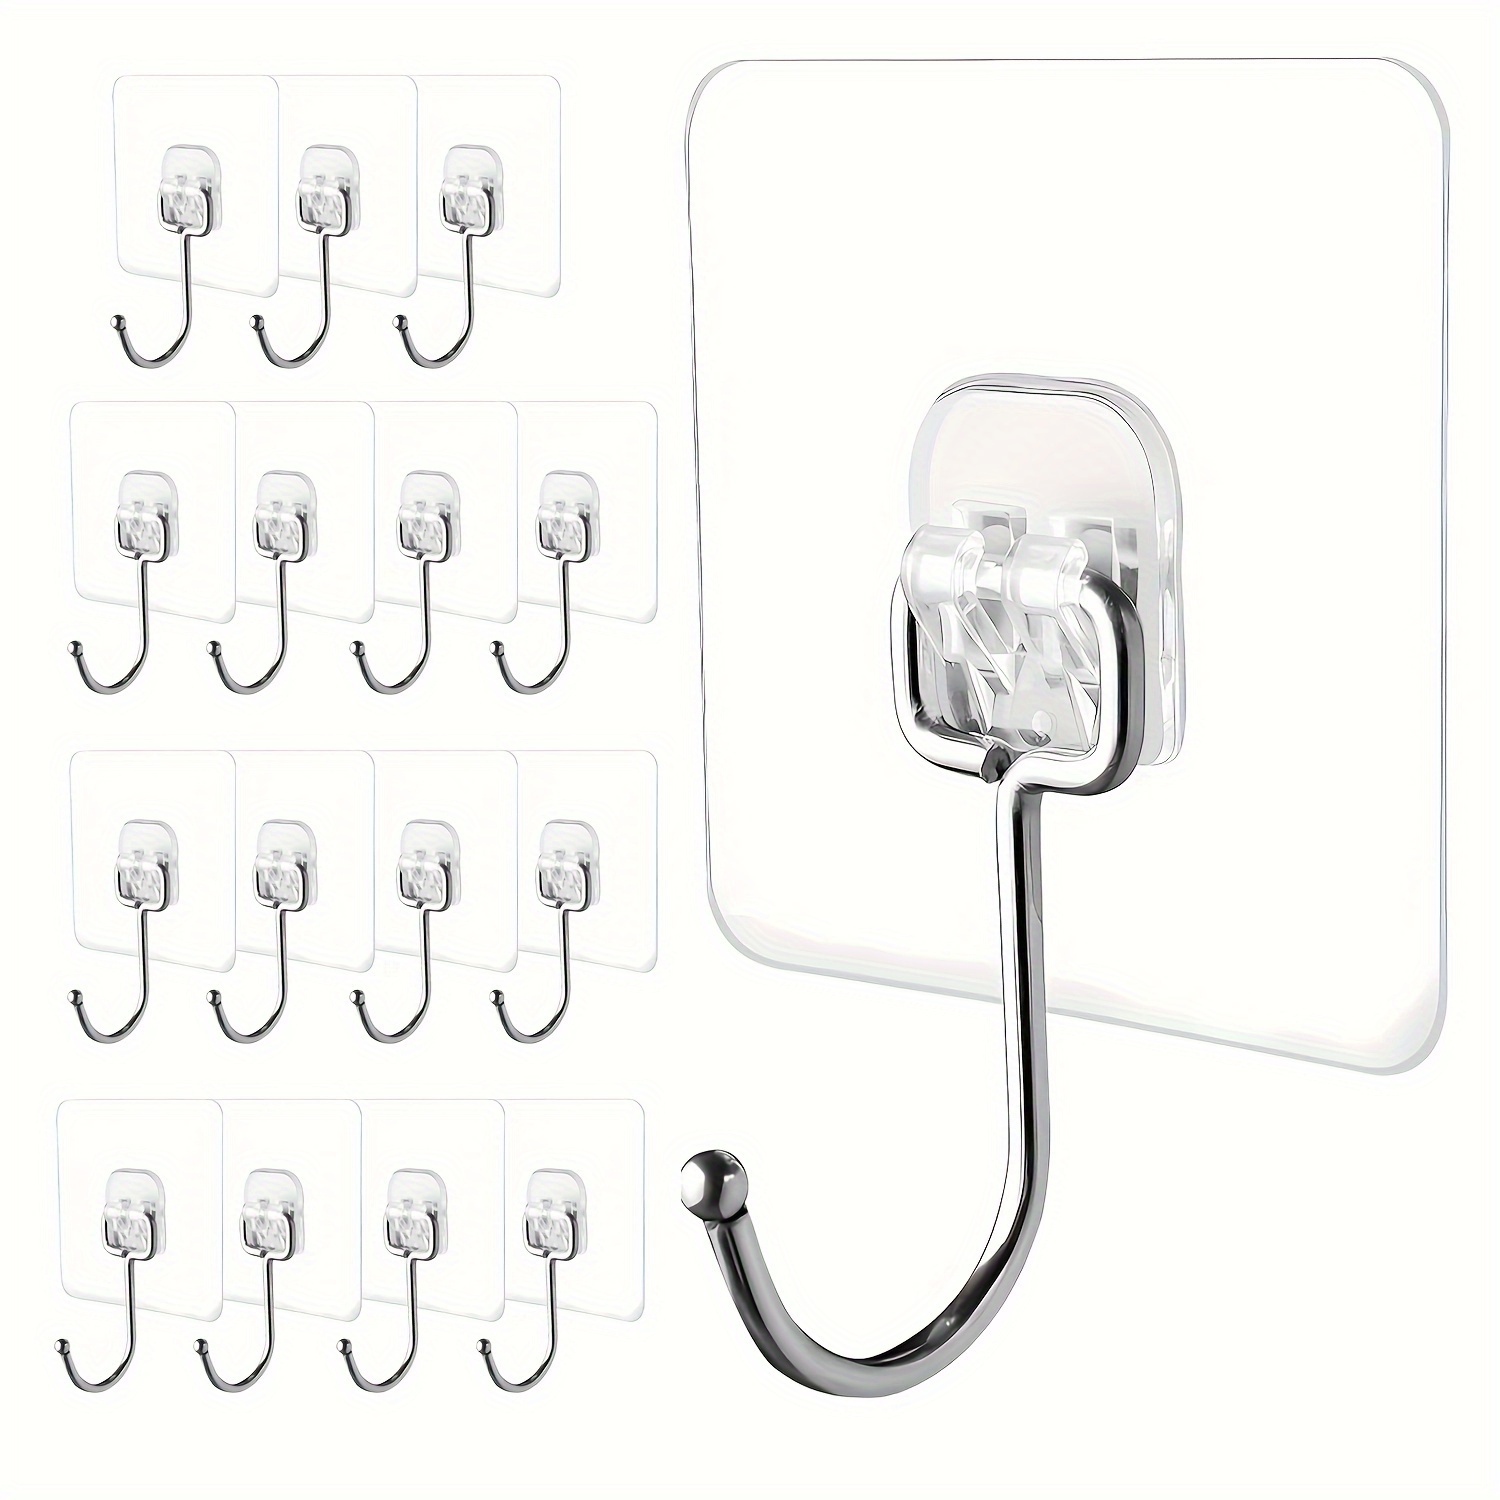 Large Hooks Heavy Duty Waterproof Adhesive Home Essentials Wall Hooks for  Kitchen Bathroom Outdoor and More (6/8/12/16 PACKS)Hanging Wall Hook Large  Waterproof Hook Hanger For Display